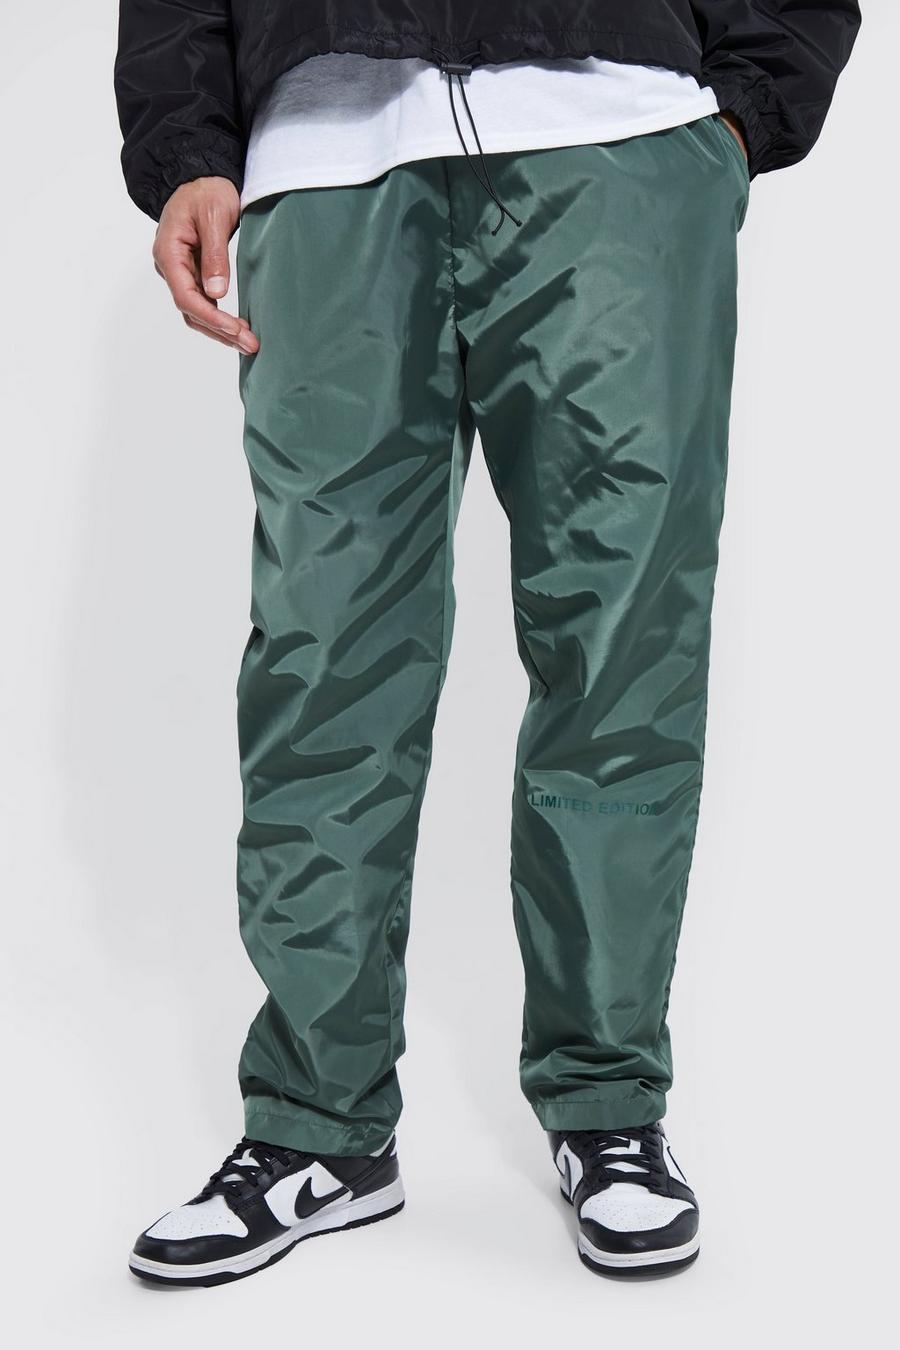 Tall Elastic Waist Limited Edition Trouser , Forest verde